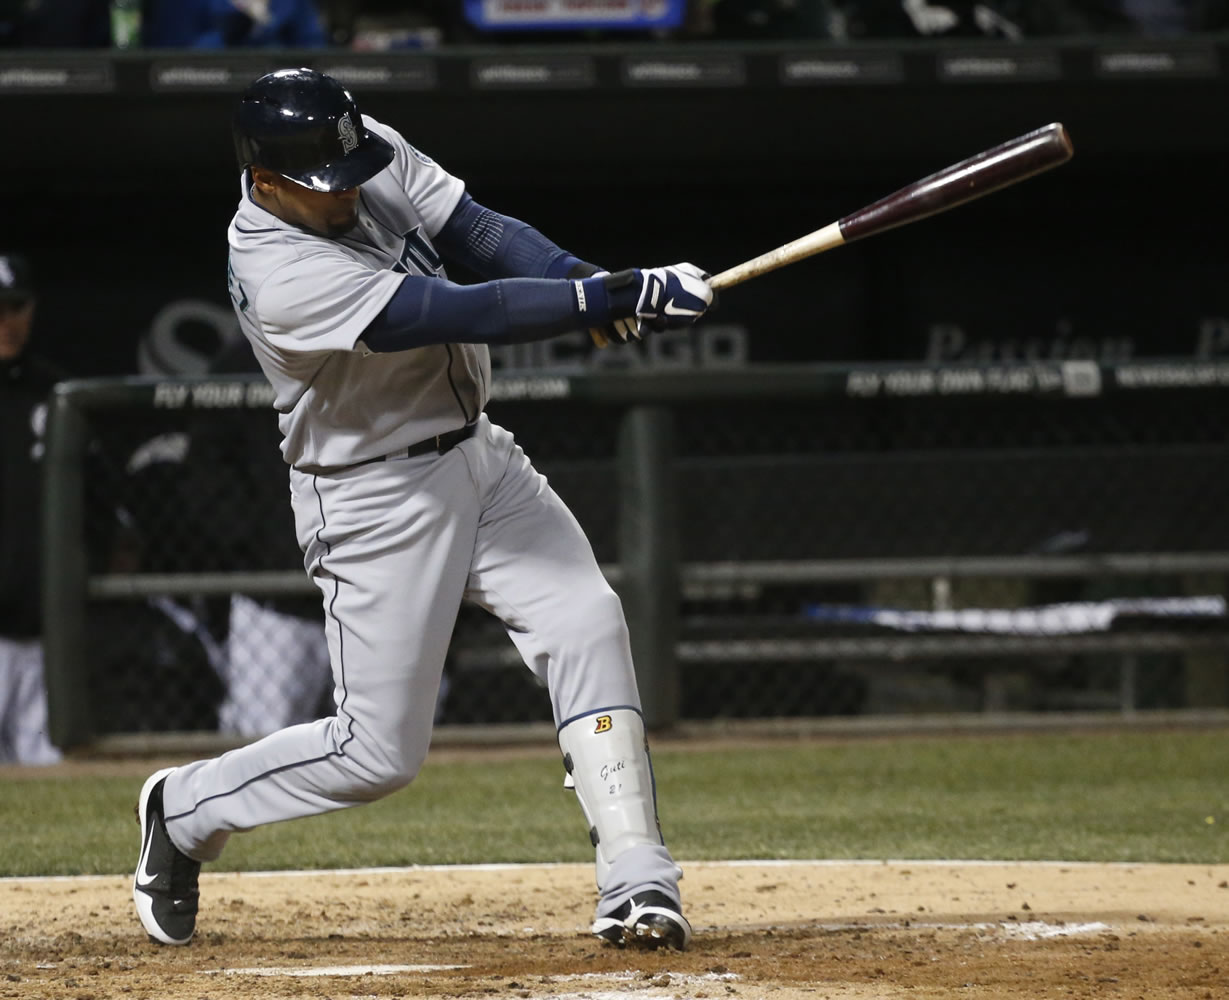 Seattle Mariners' Franklin Gutierrez hits a two-run double off Chicago White Sox starting pitcher Jose Quintana, scoring Dustin Ackley and Brendan Ryan, during the fifth inning Friday.